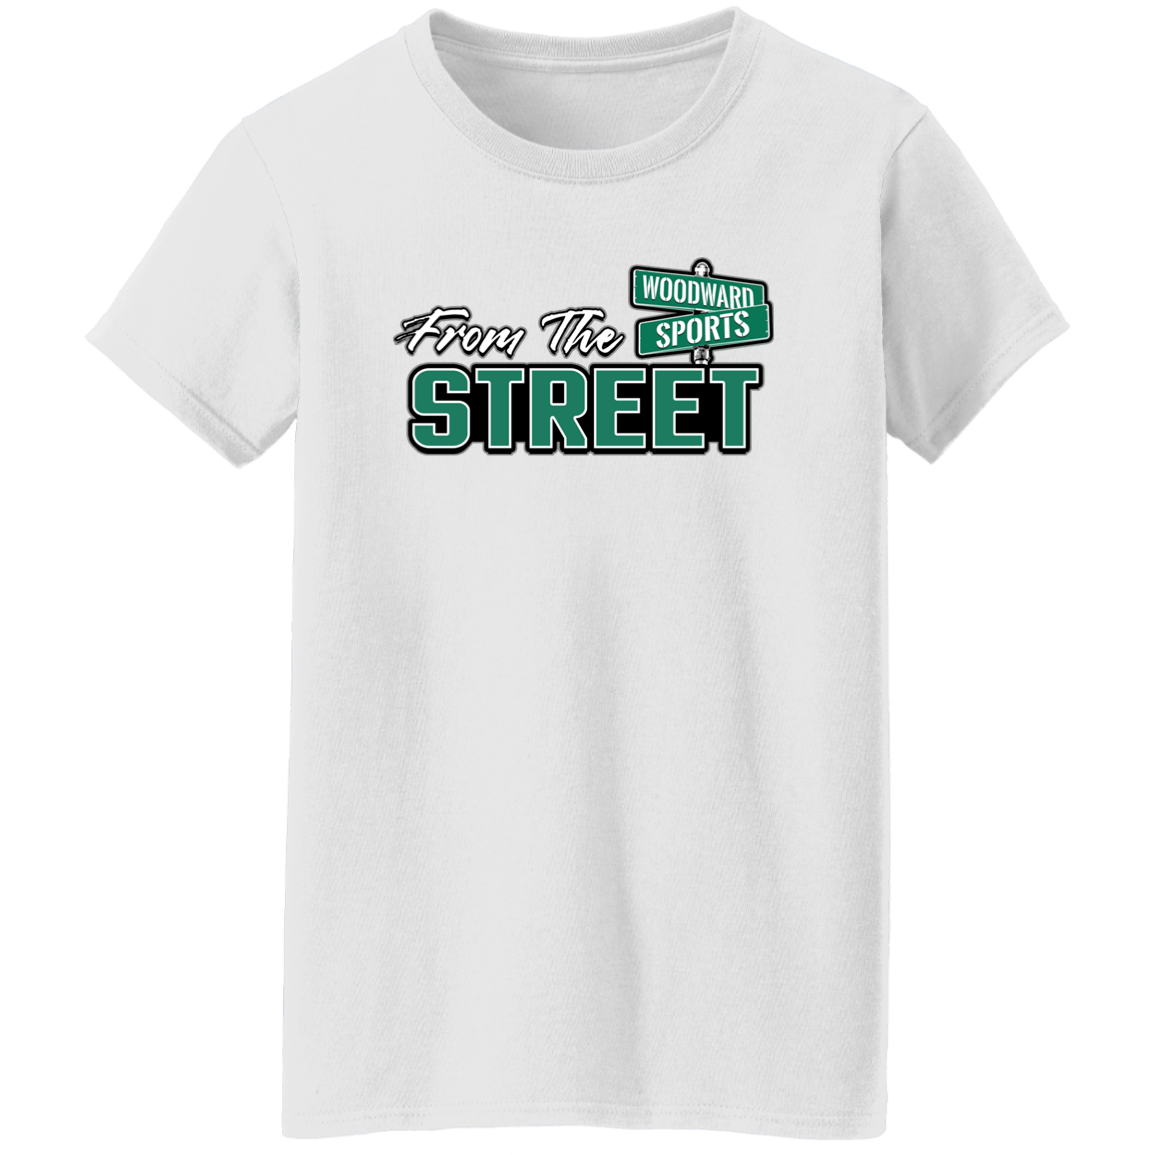 From The Street Women's Tee